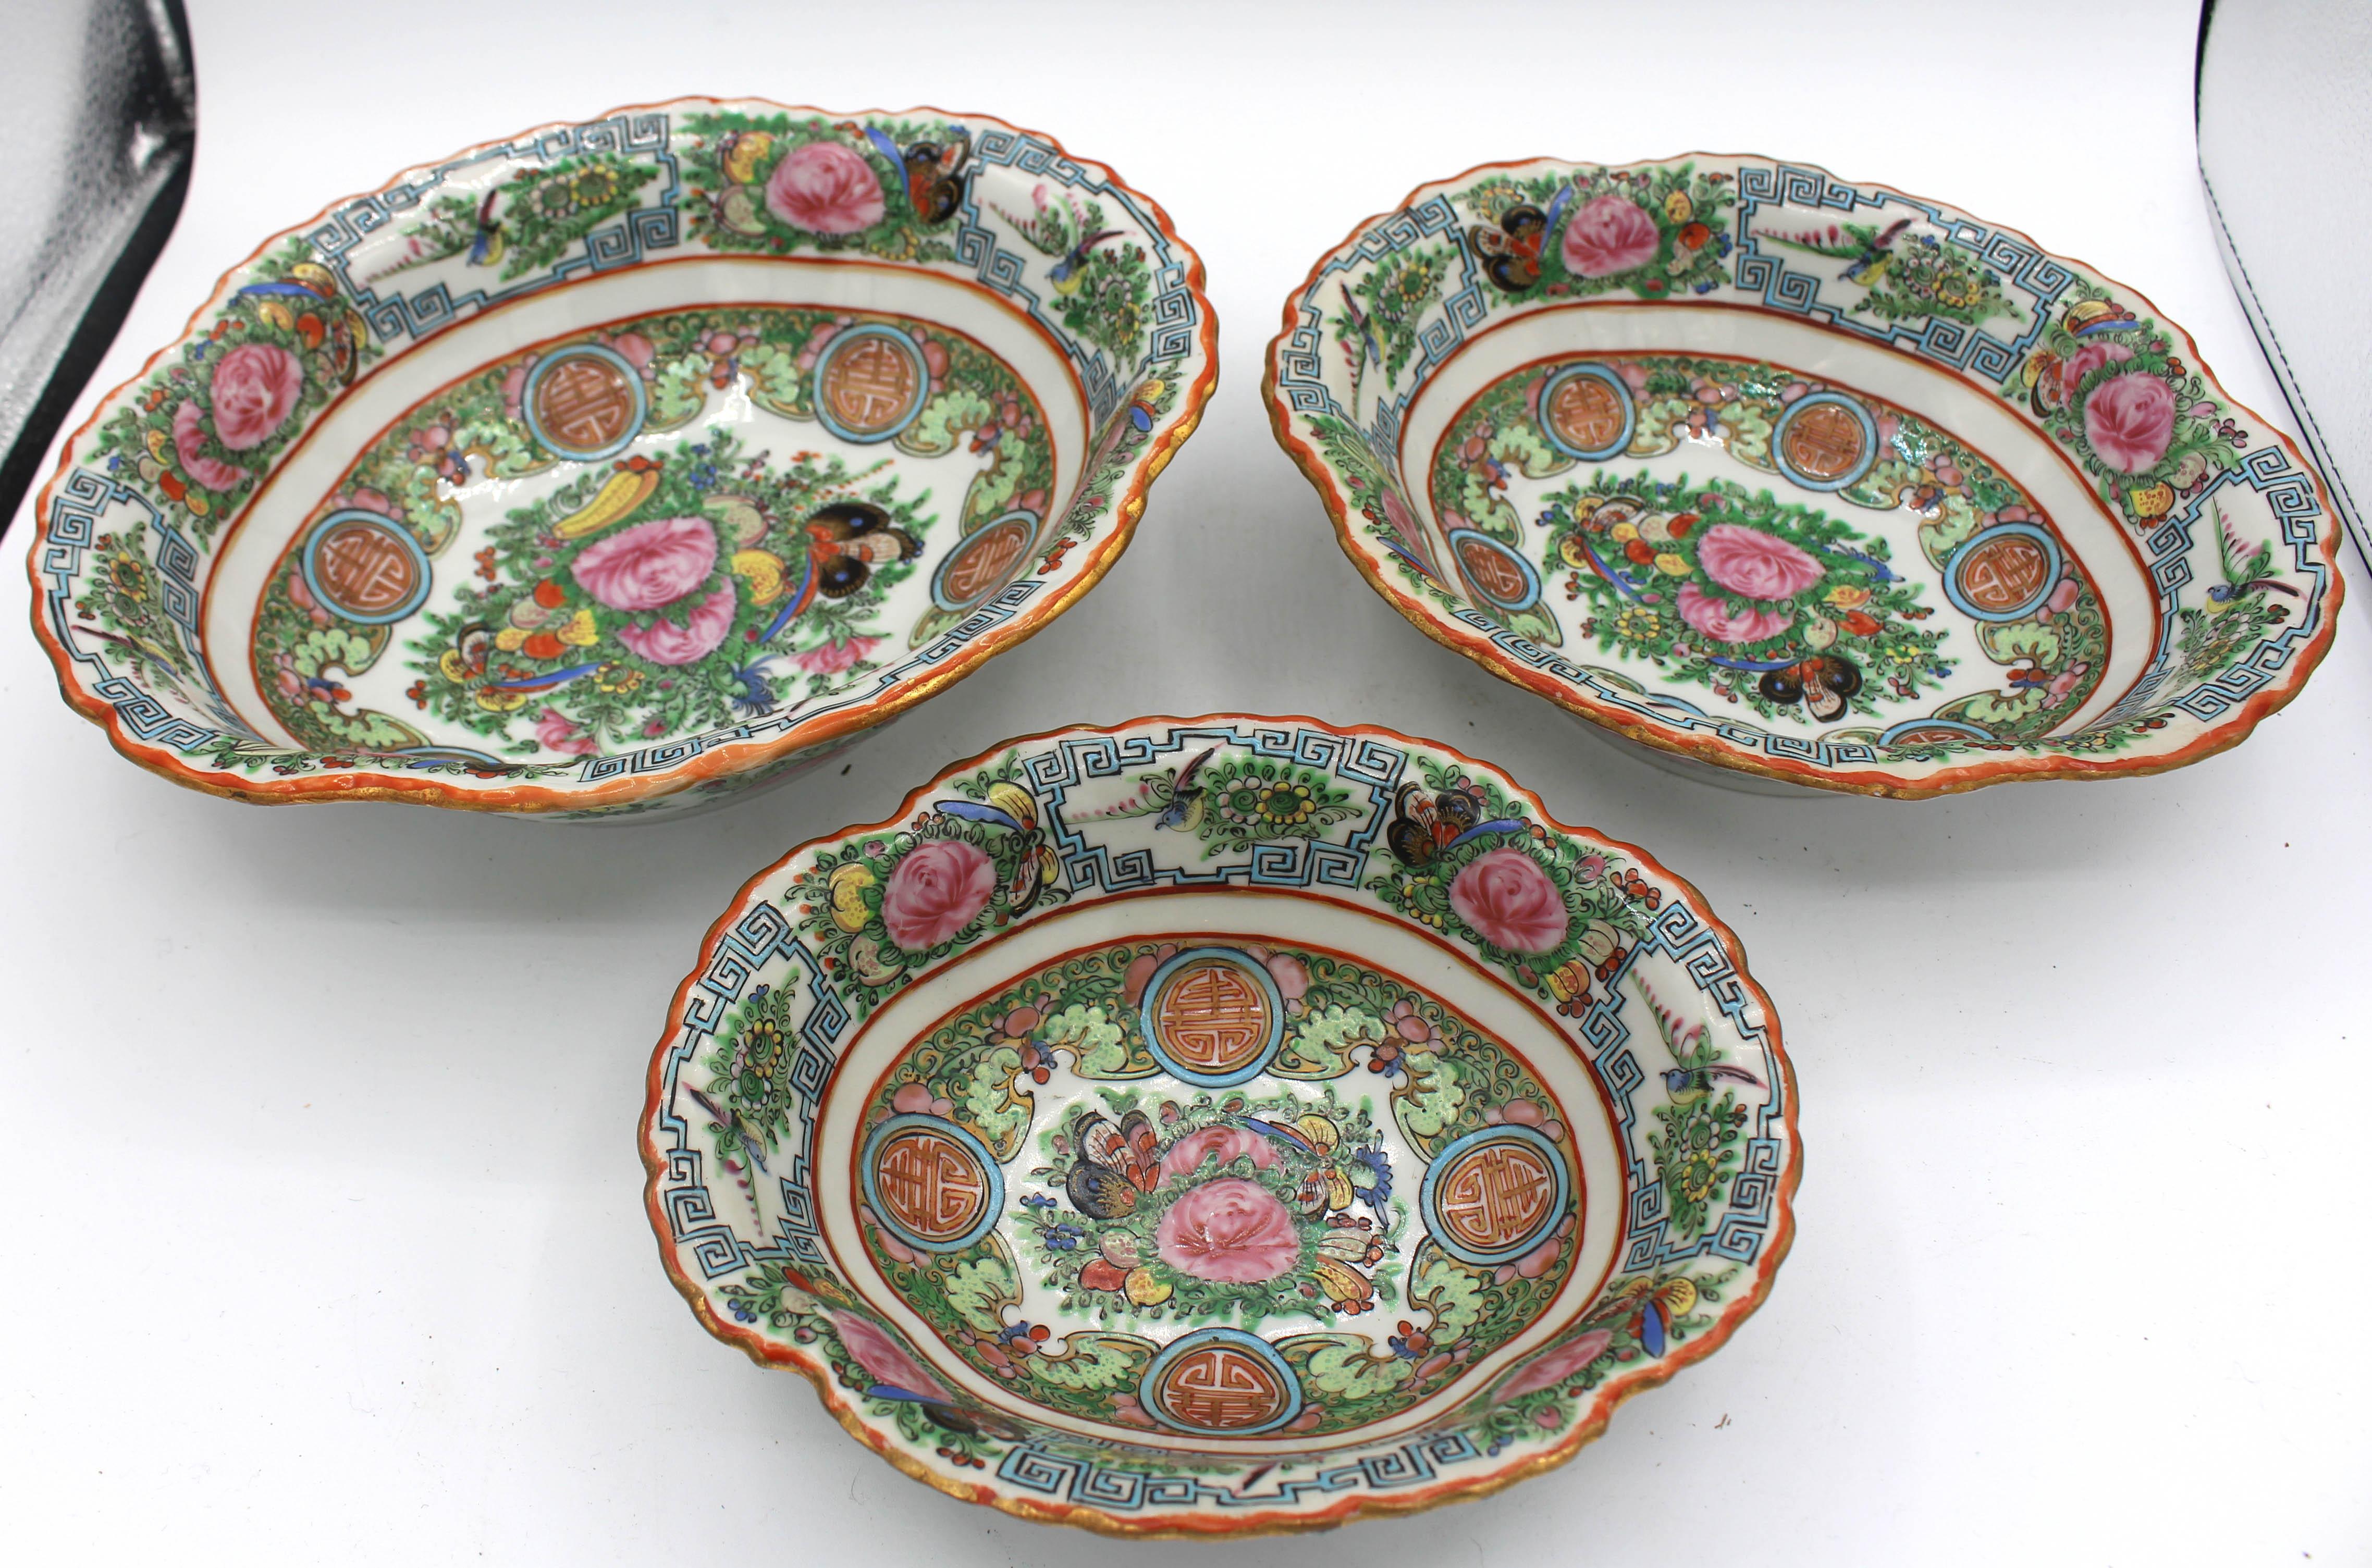 Circa 1920 Chinese Export Rose Canton Nest of 3 Oval Serving Bowls. A rare set. Late Qing to Republic period. Richly enamelled in butterflies, bird & flowers. Marked 